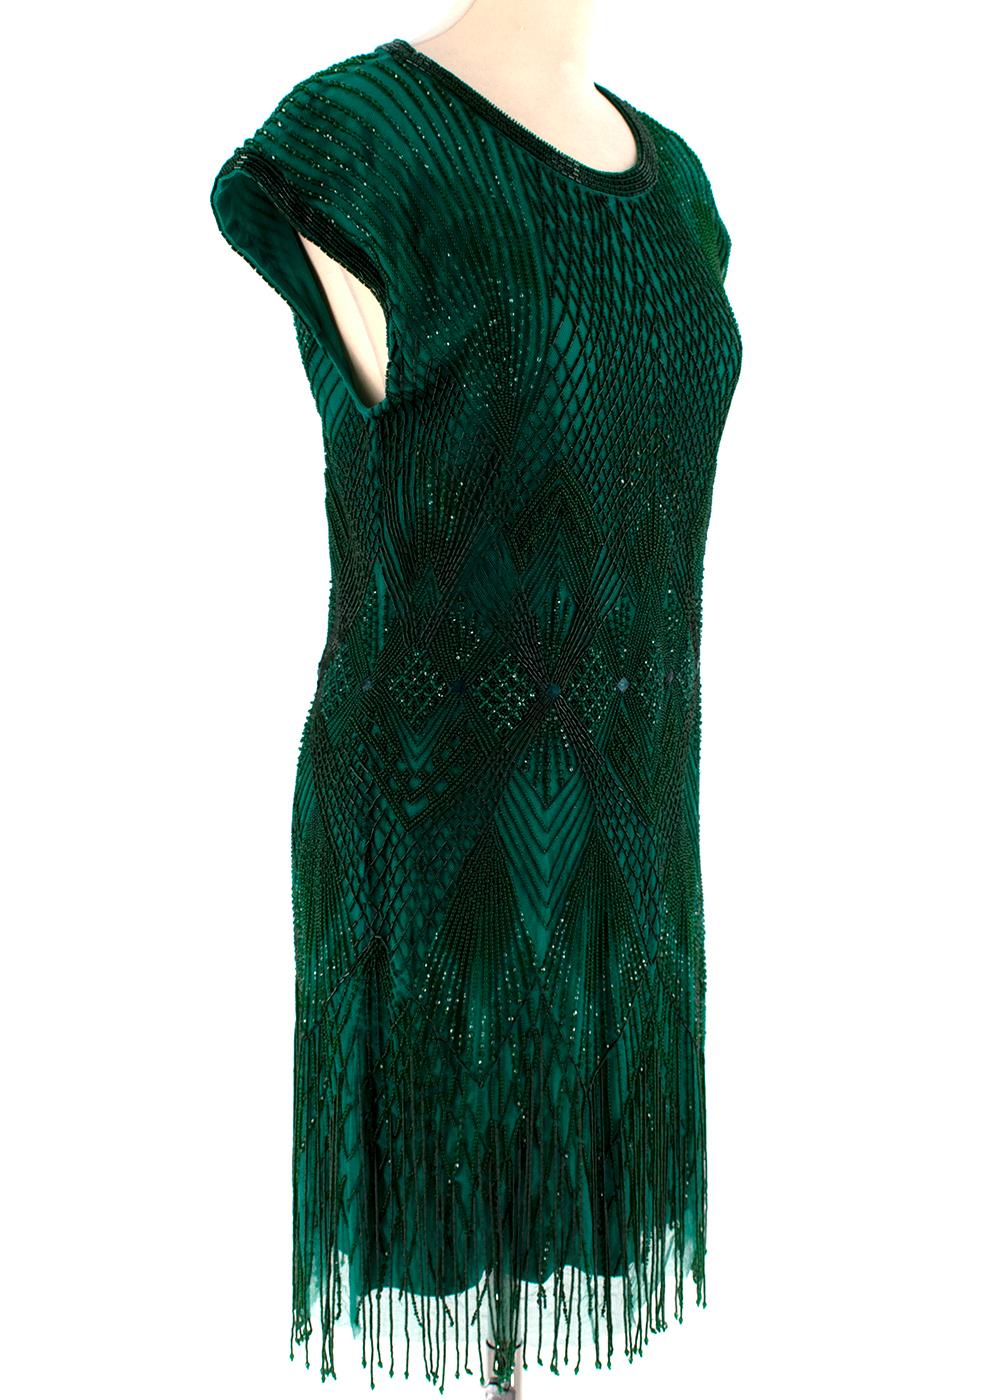 Roberto Cavalli Green Beaded Mini Dress 

-Sleeveless classic cut 
-luxurious soft silk lining
-Amazing intricate beading
-Branded zip fastening to the back  
-Fringe effect to the hem 
-Perfect for an extra glamorous day or super fun